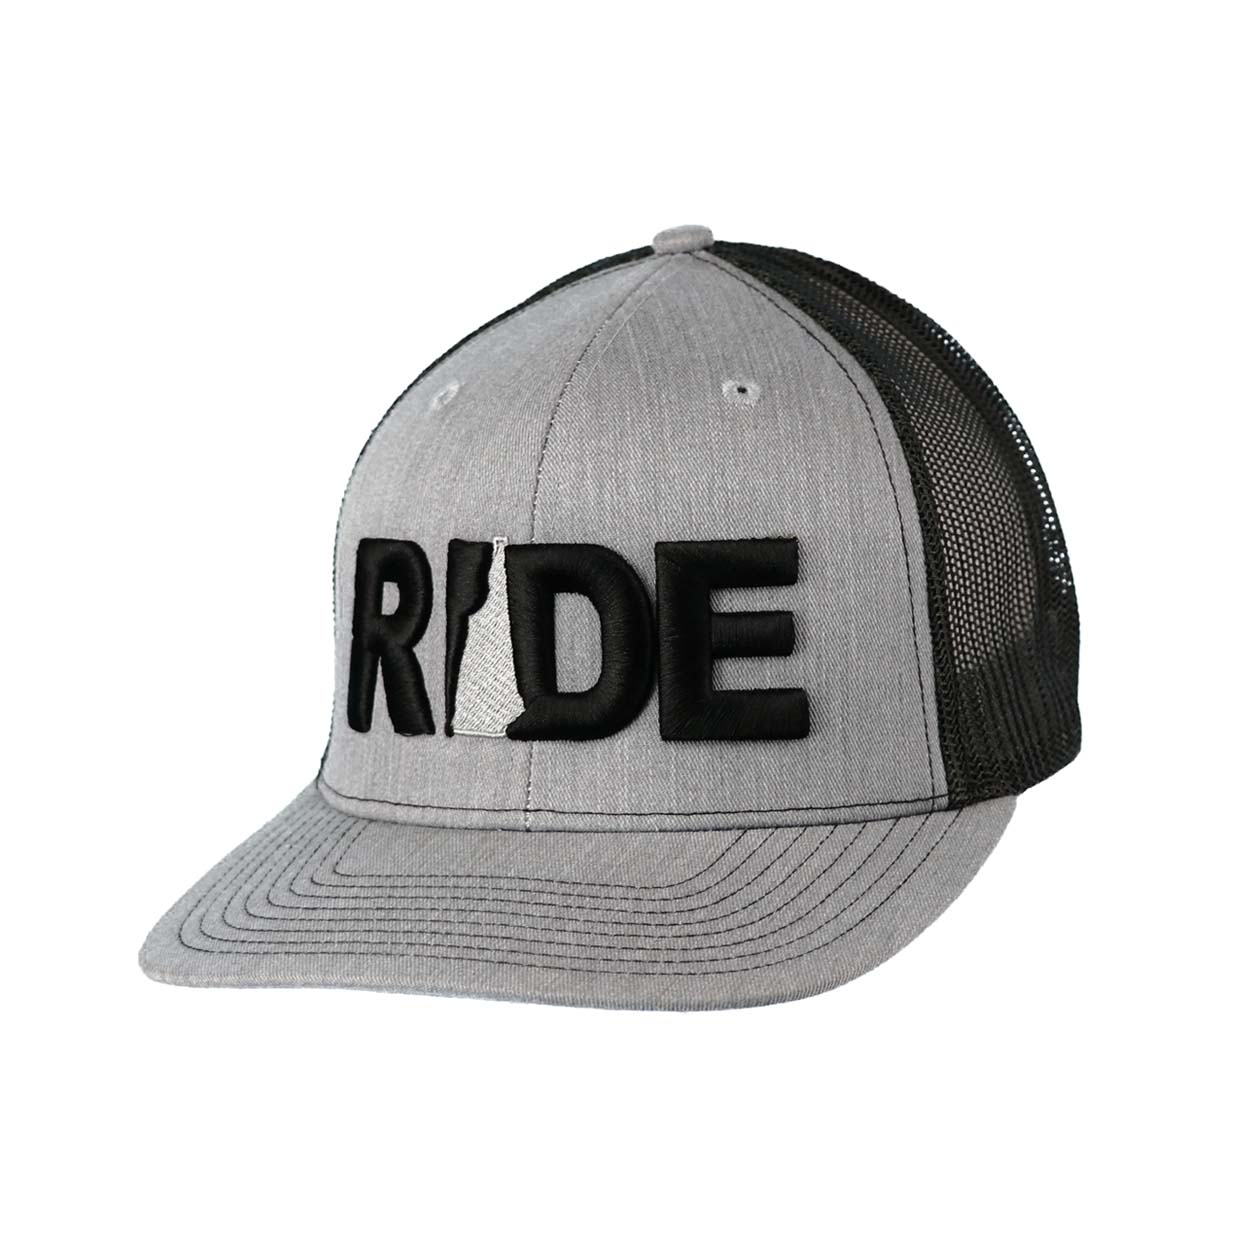 Ride New Hampshire Classic Pro 3D Puff Embroidered Snapback Trucker Hat Heather Gray/Black